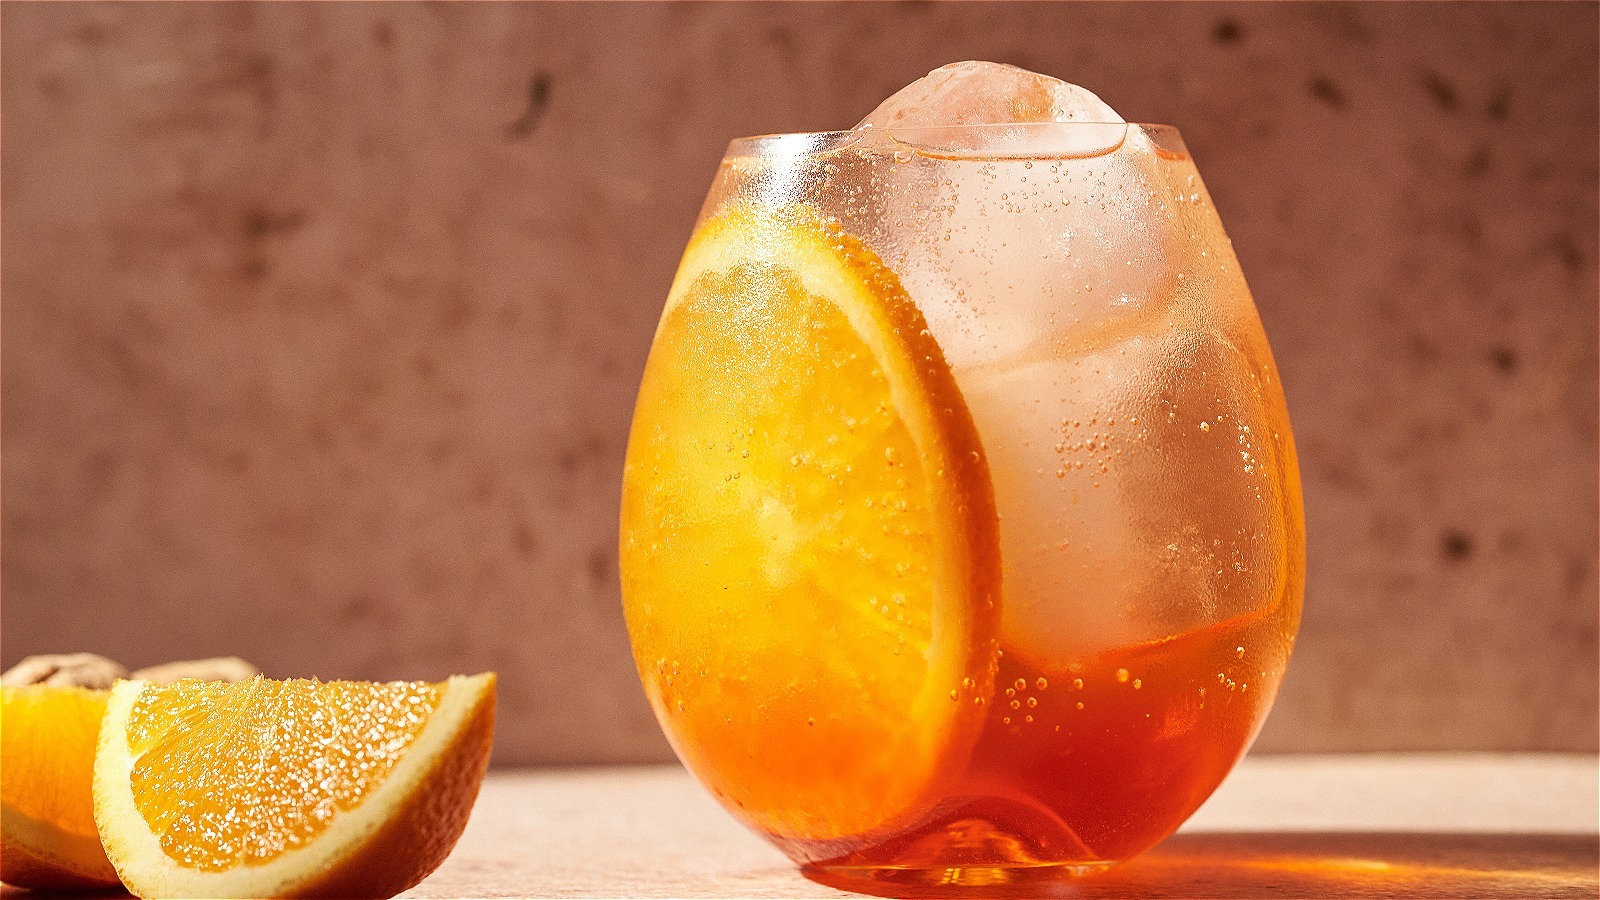 Aperol Spritz – The Perfect Summer Drink! – That Drinking Show